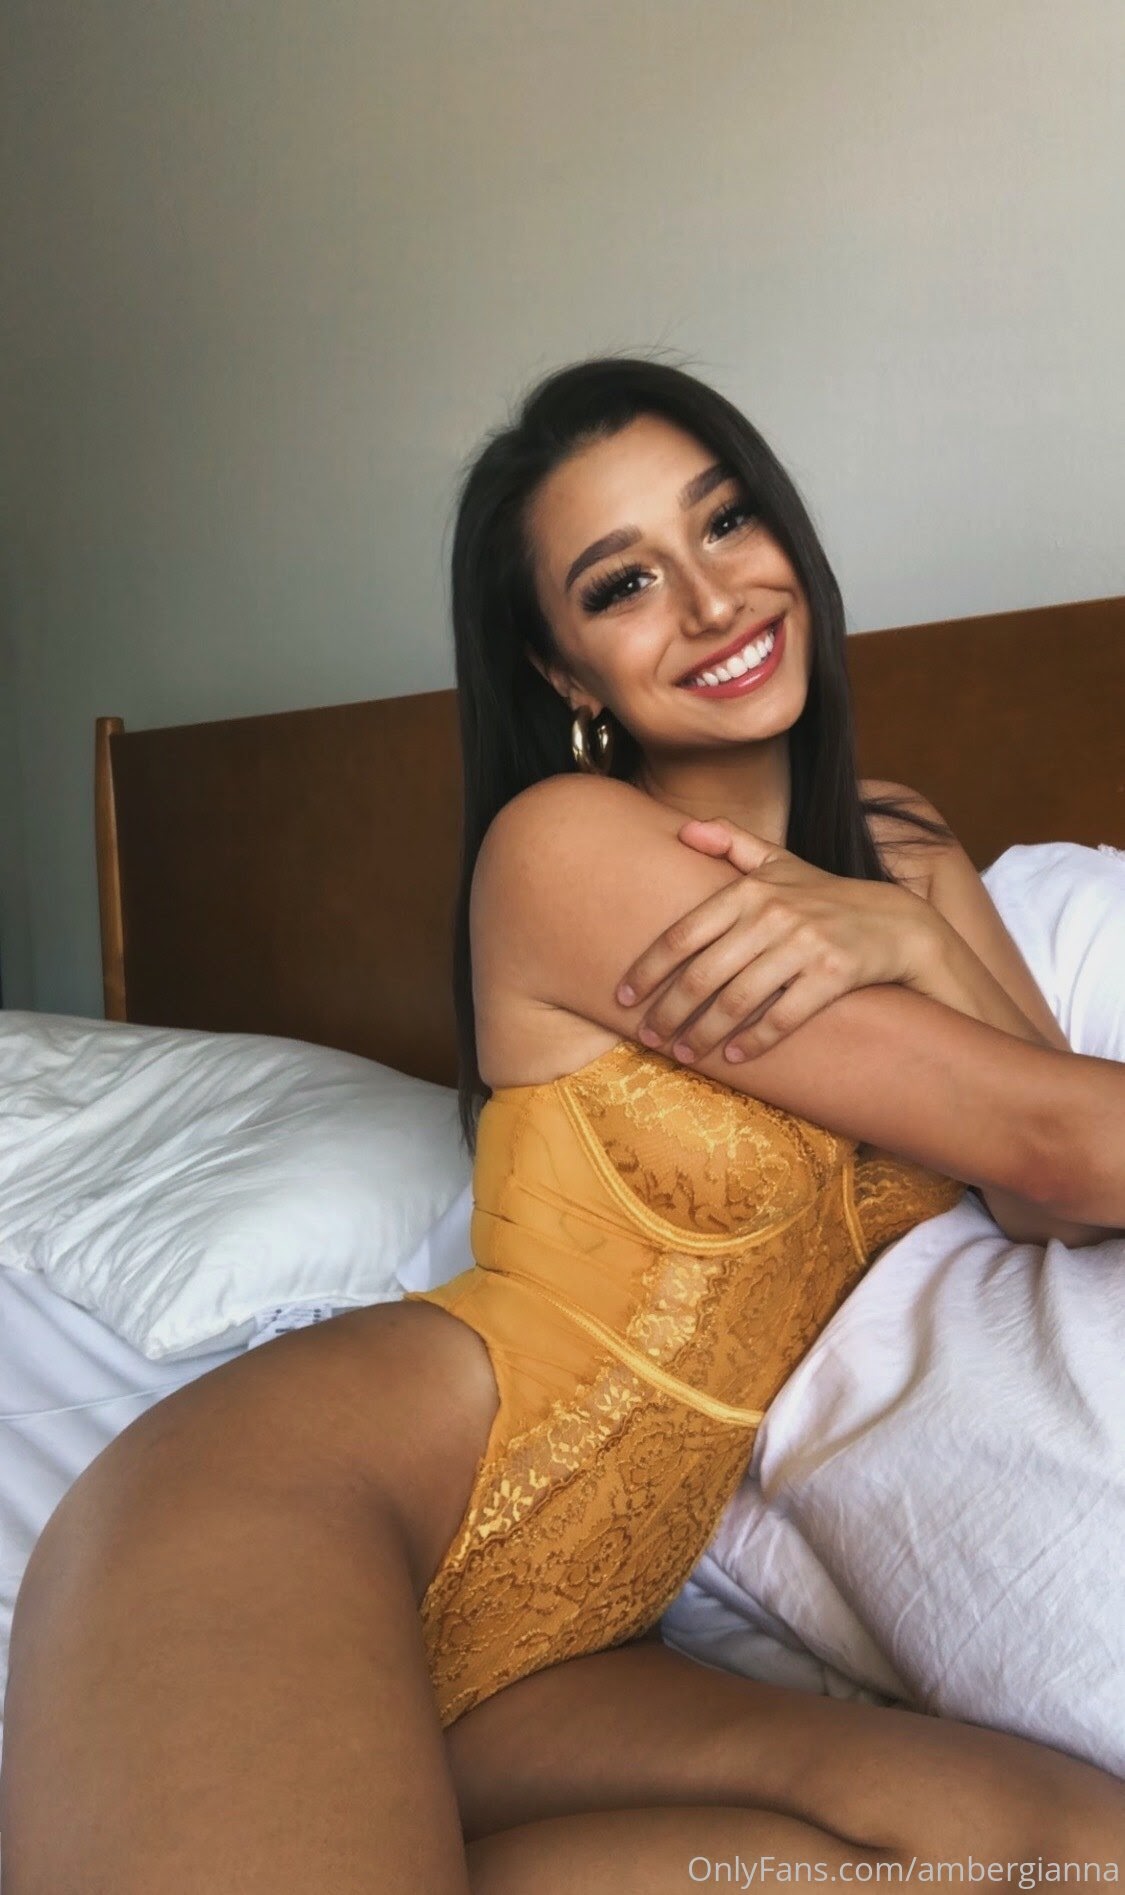 Amber gianna only fans